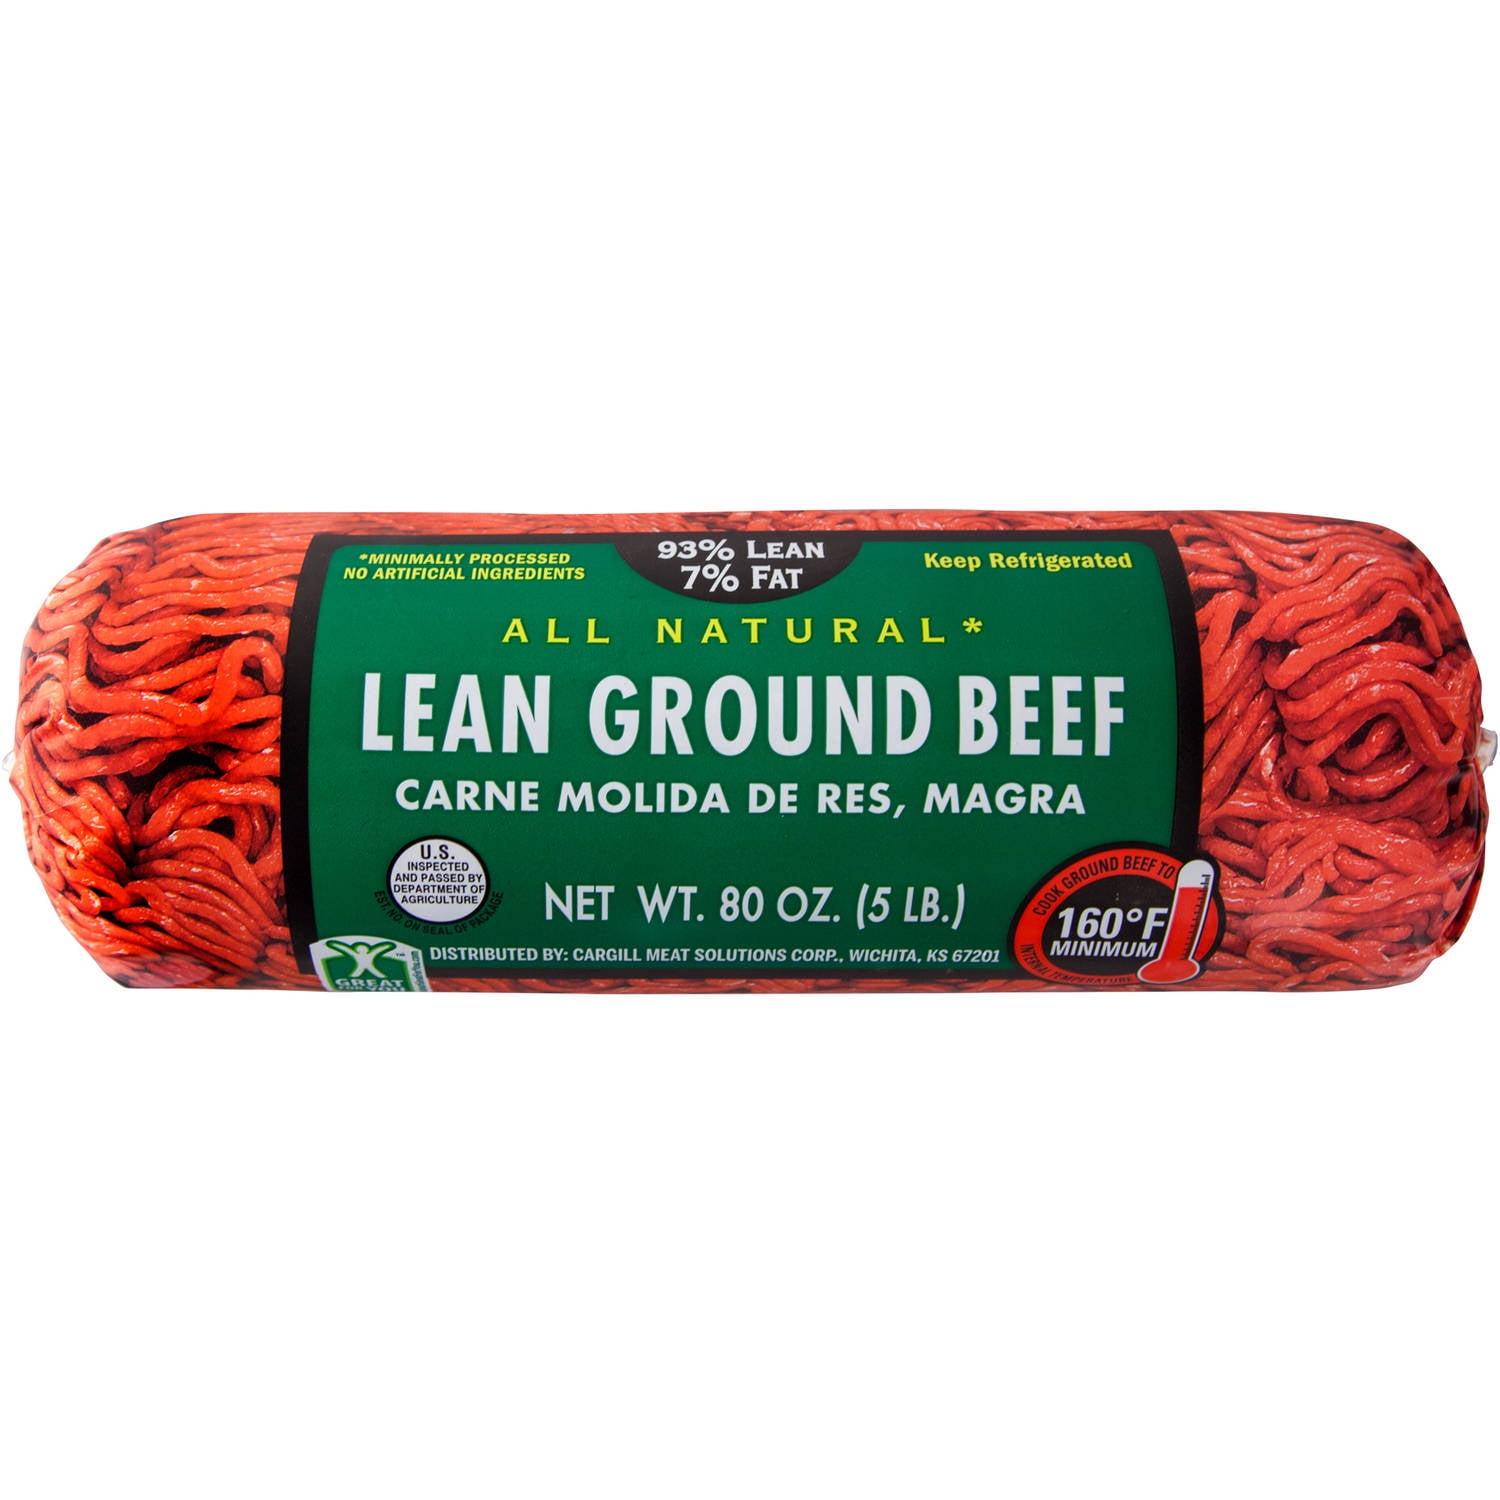 98 Lean Ground Beef Nutrition Facts Nutrition And Dietetics inside Nutrition Facts 90 Lean Ground Beef